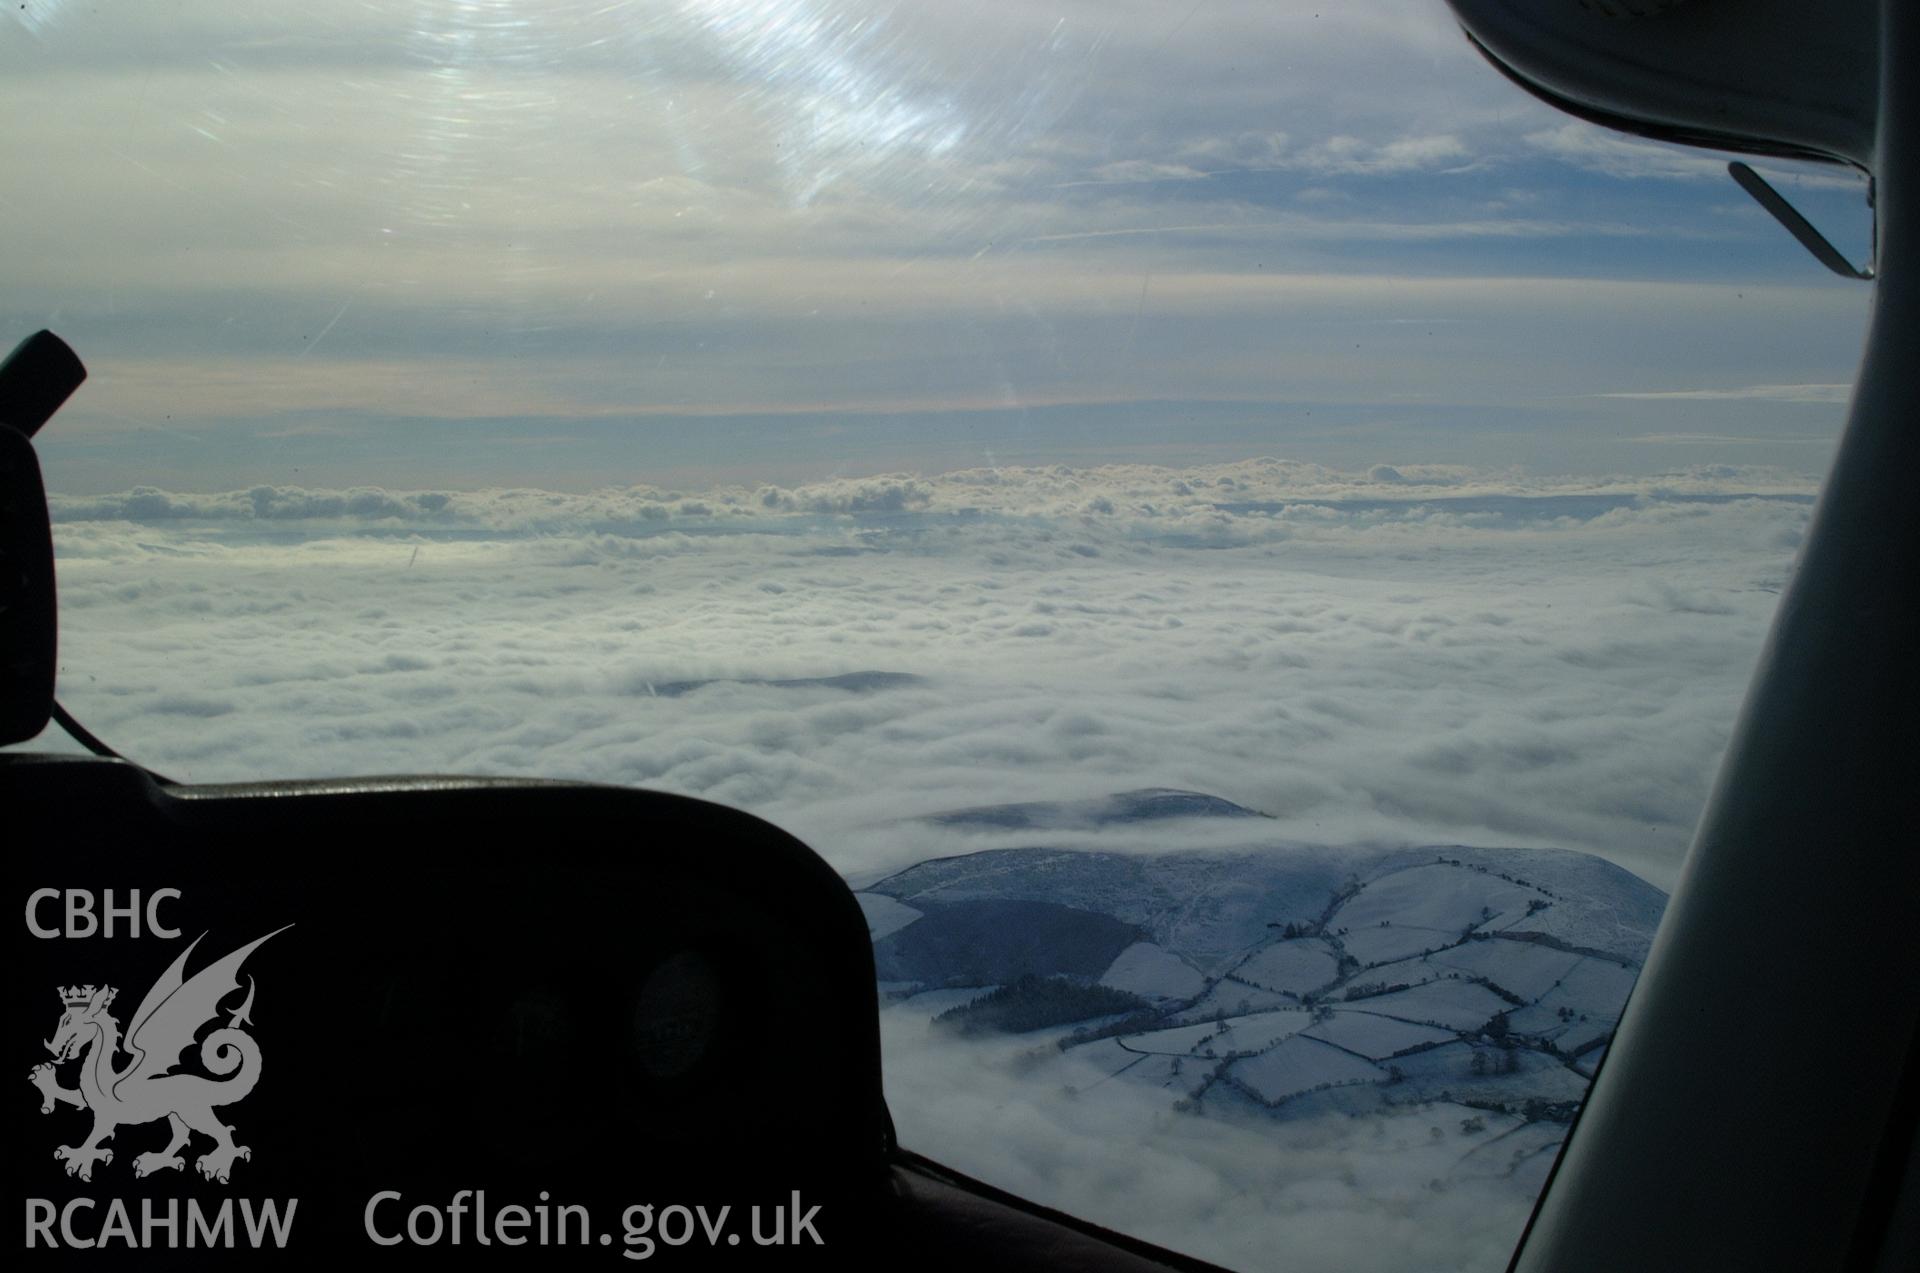 RCAHMW colour oblique aerial photograph of hills and commons south of Llananno, viewed from the north under snow and freezing fog, through the aircraft windscreen. Taken on 19 November 2004 by Toby Driver